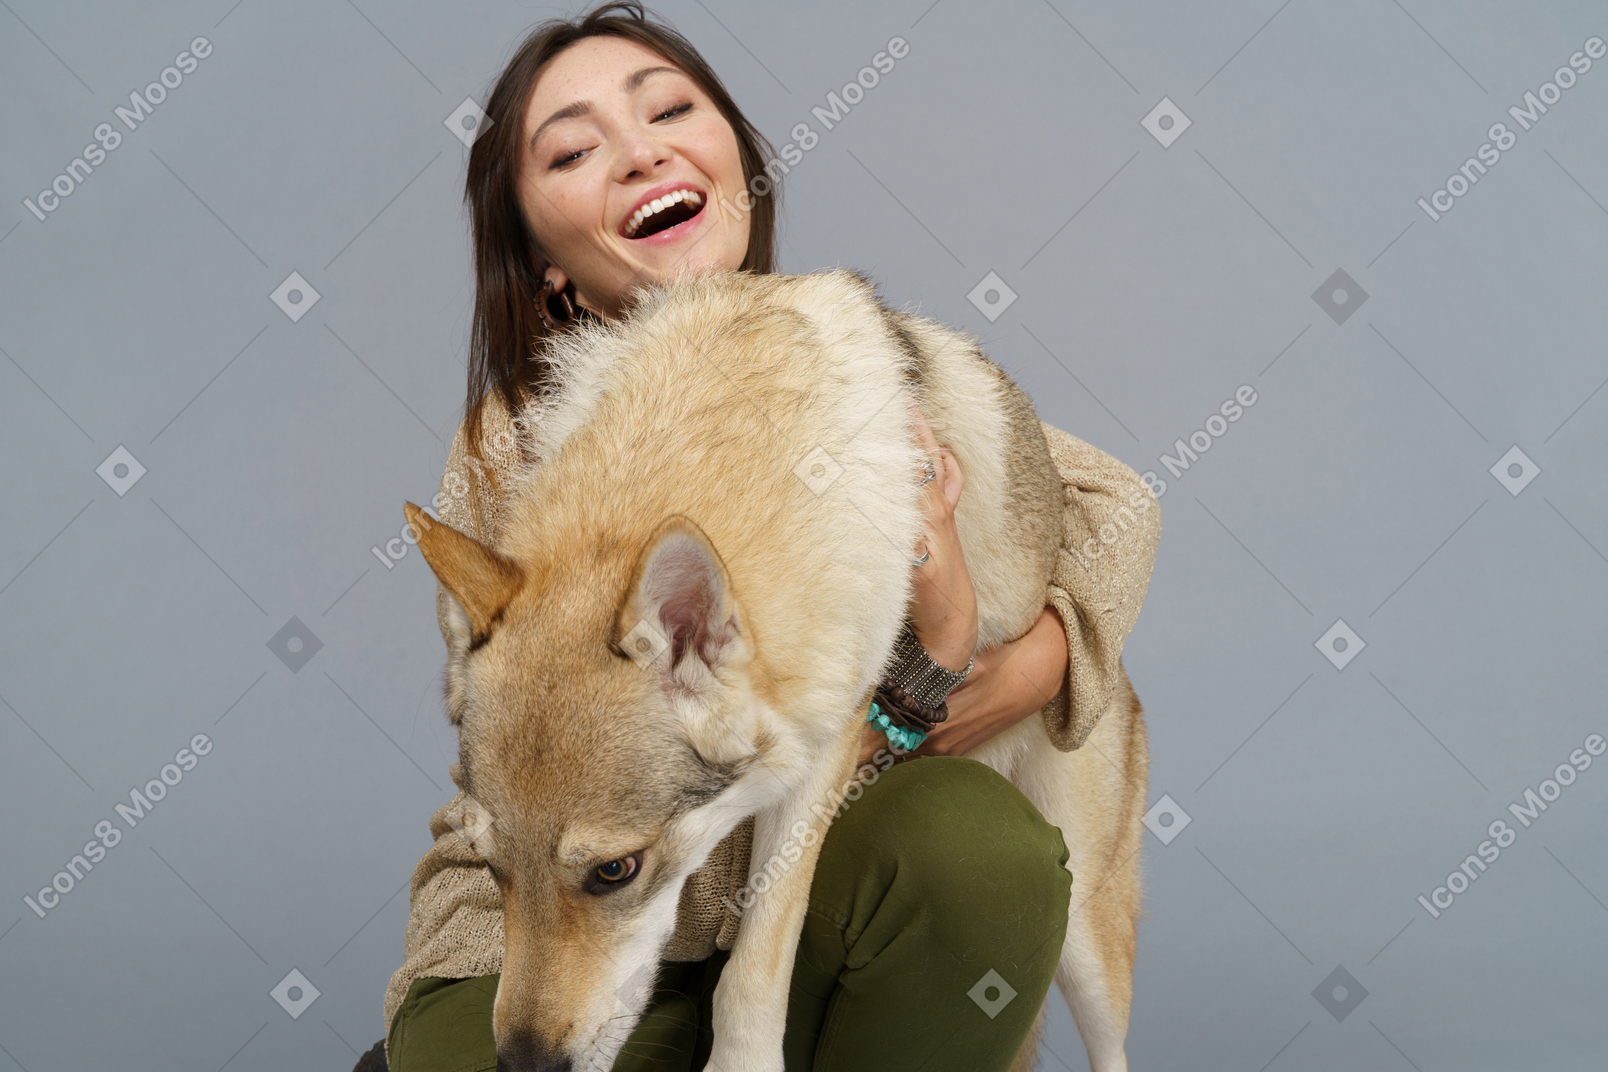 Close-up of a female master smiling and embracing her dog